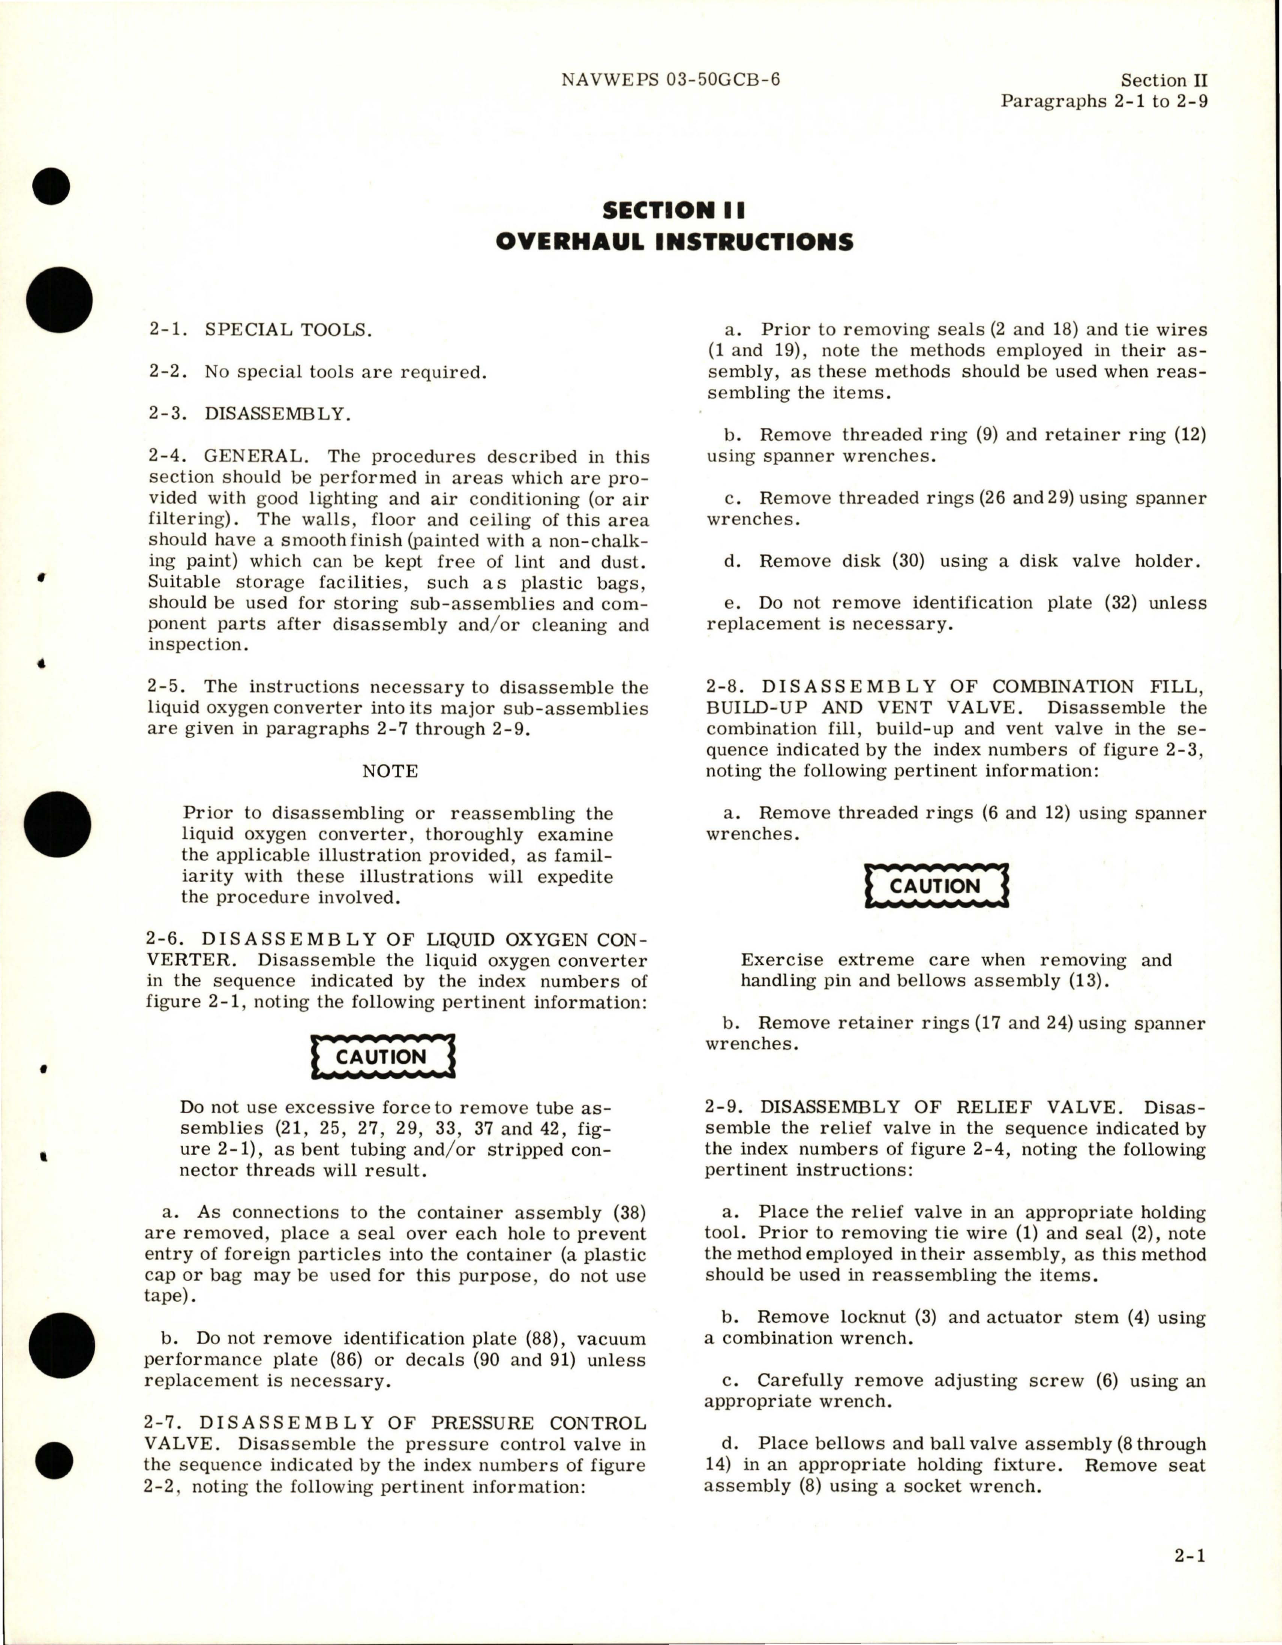 Sample page 7 from AirCorps Library document: Overhaul Instructions for 10-Liter Liquid Oxygen Converter - Part 21170-2 